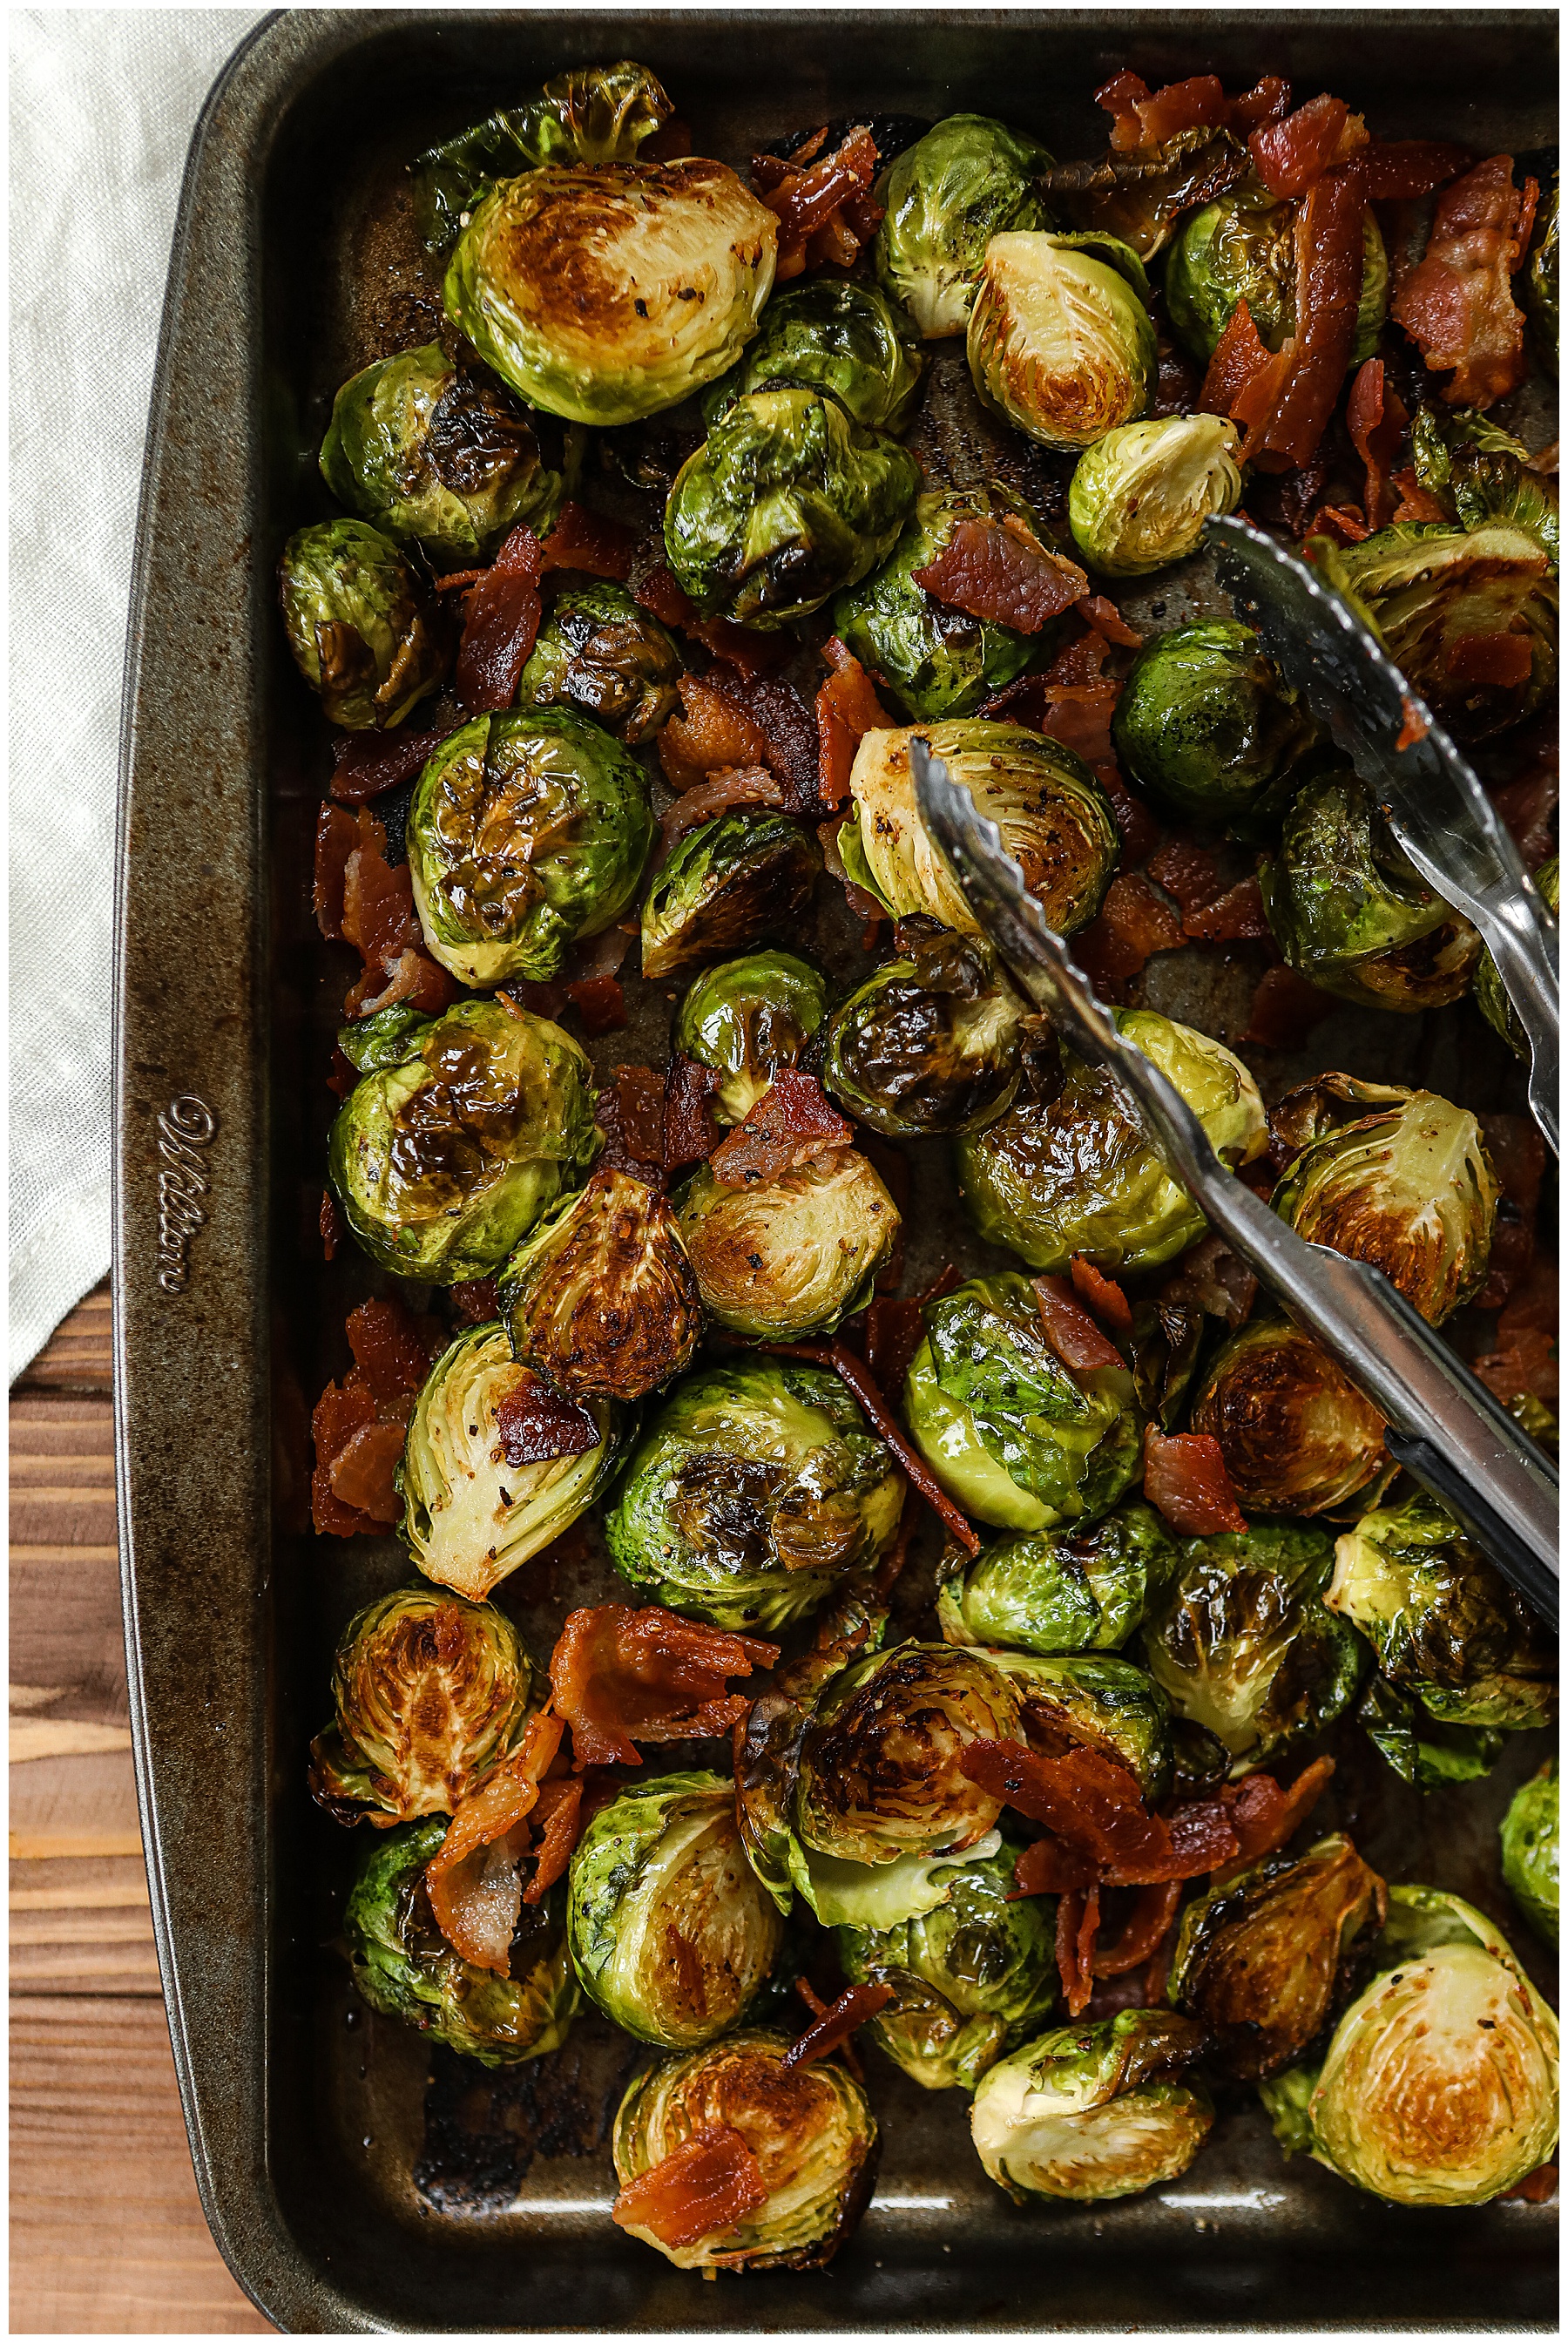 Roasted Bacon and Brussel Sprouts